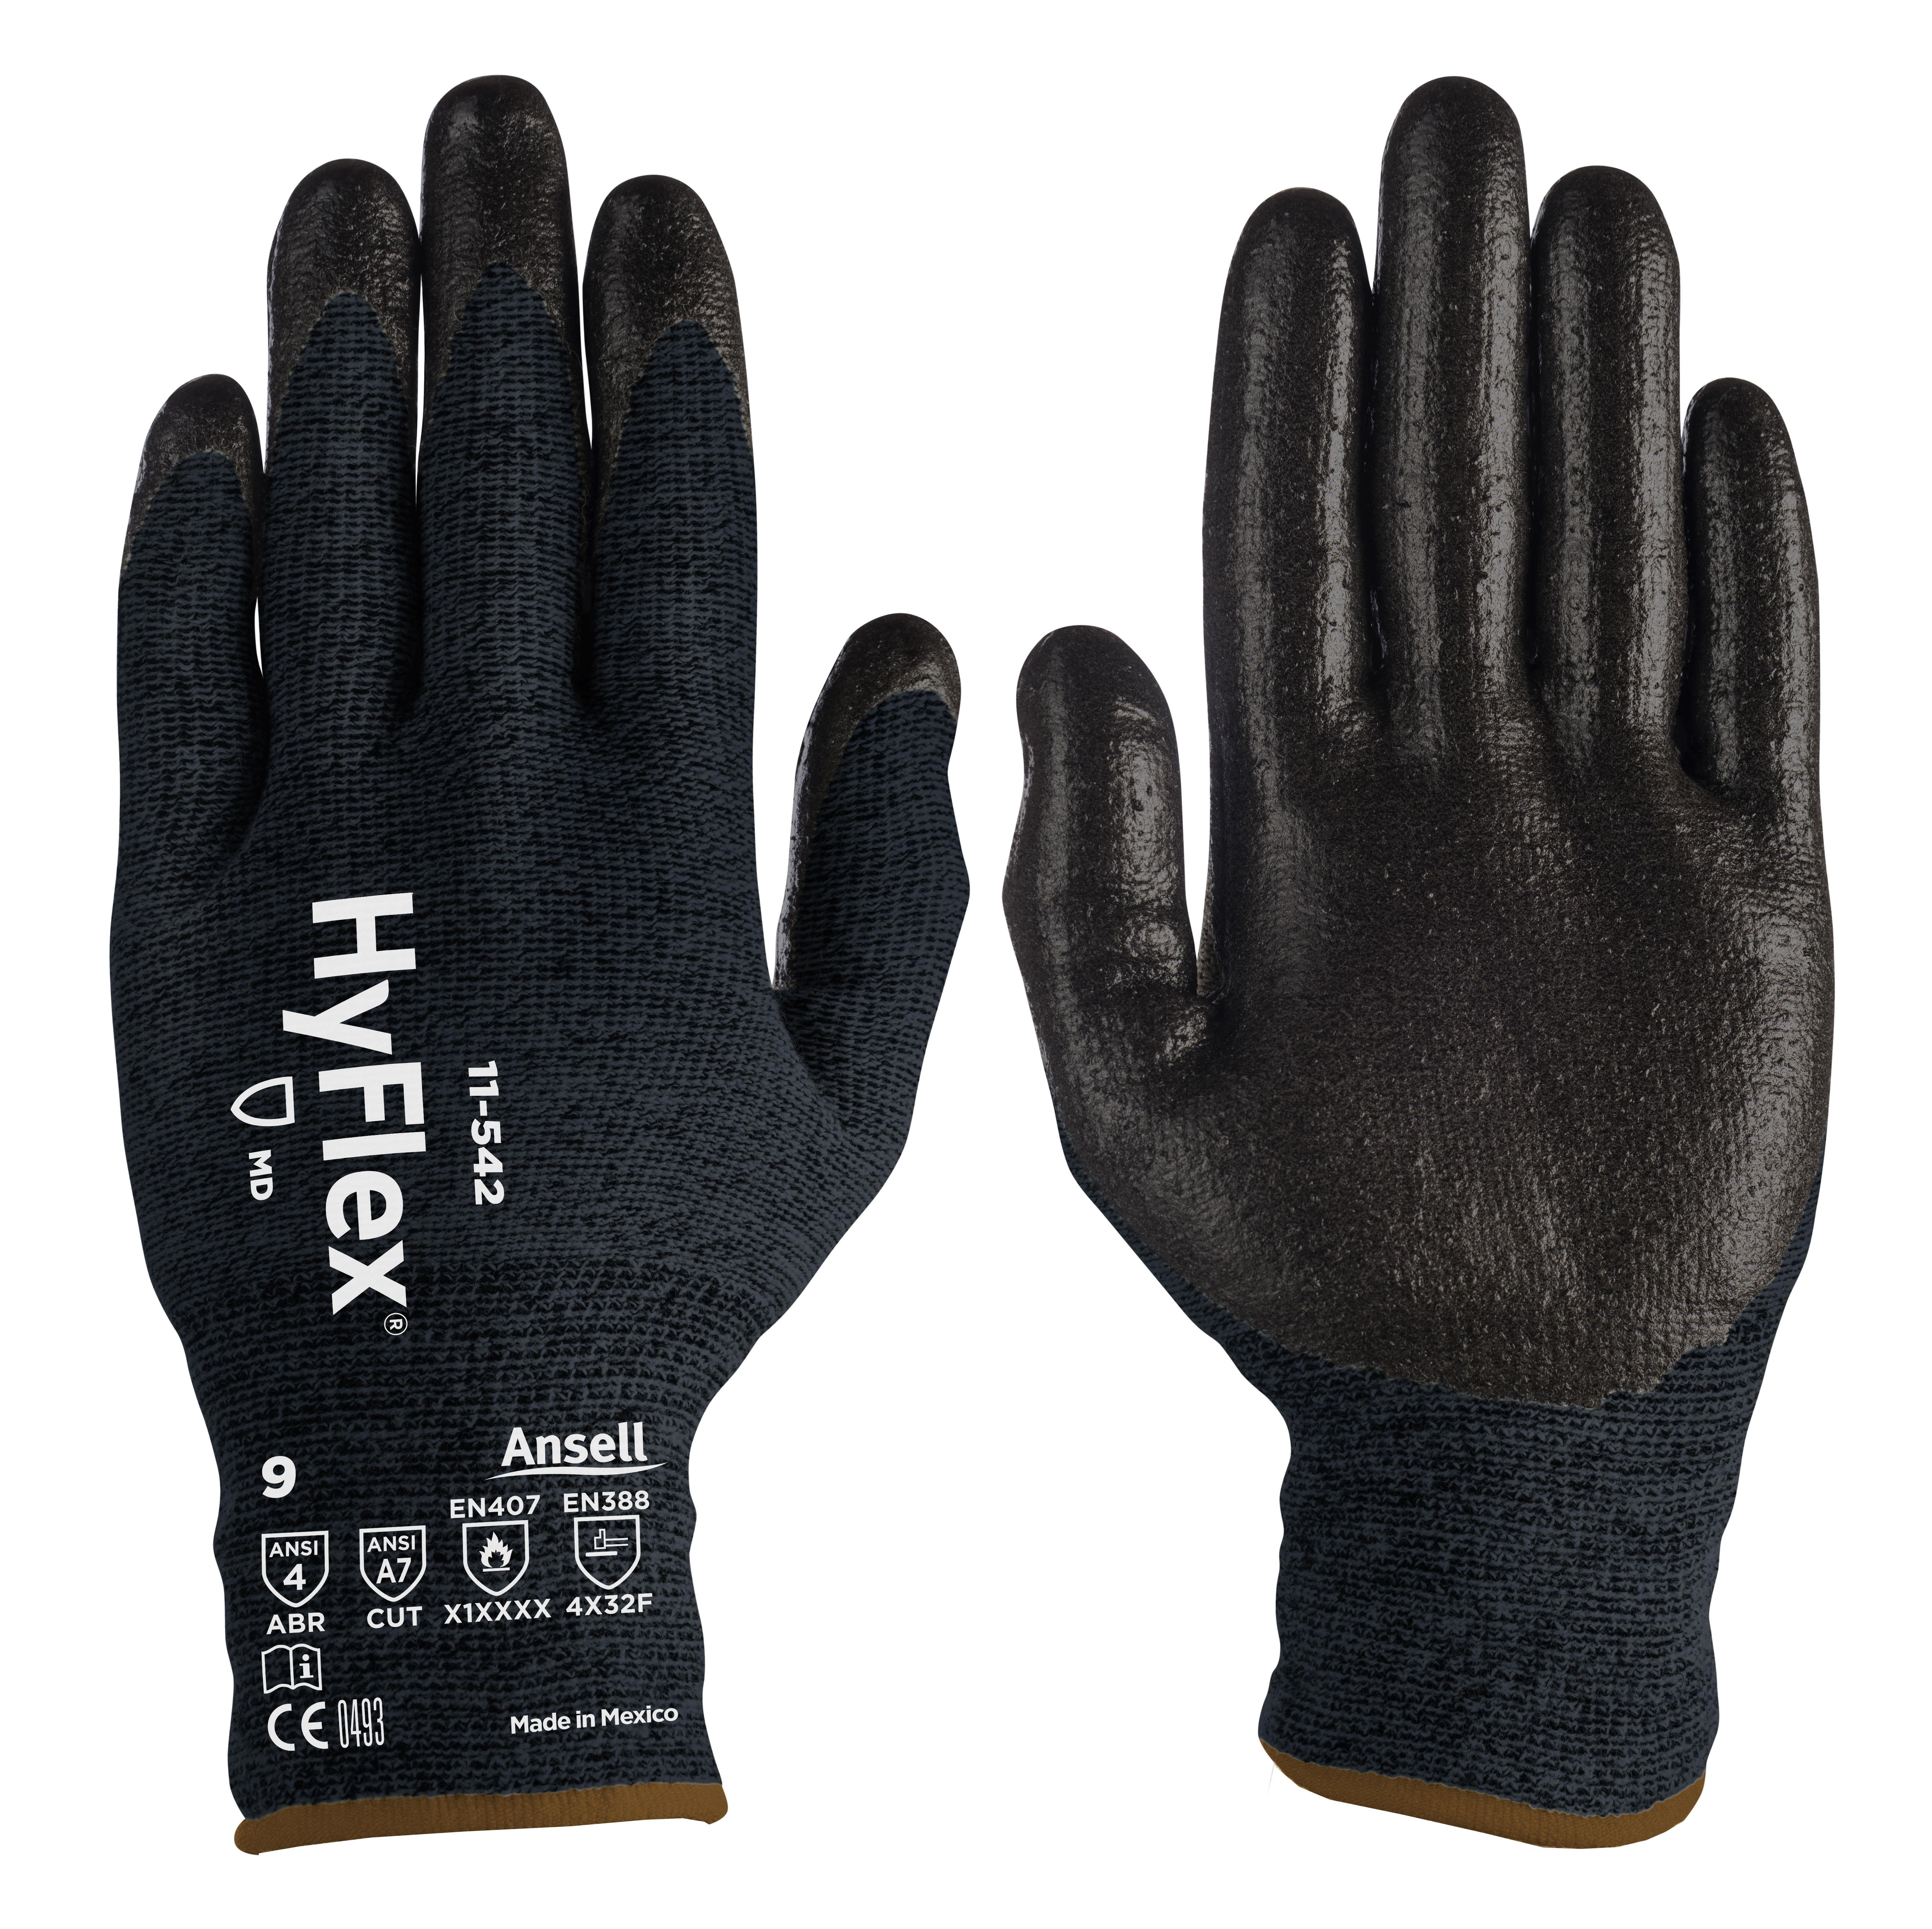 ANSELL HYFLEX 11-542 NITRILE COATED - Cut Resistant Gloves